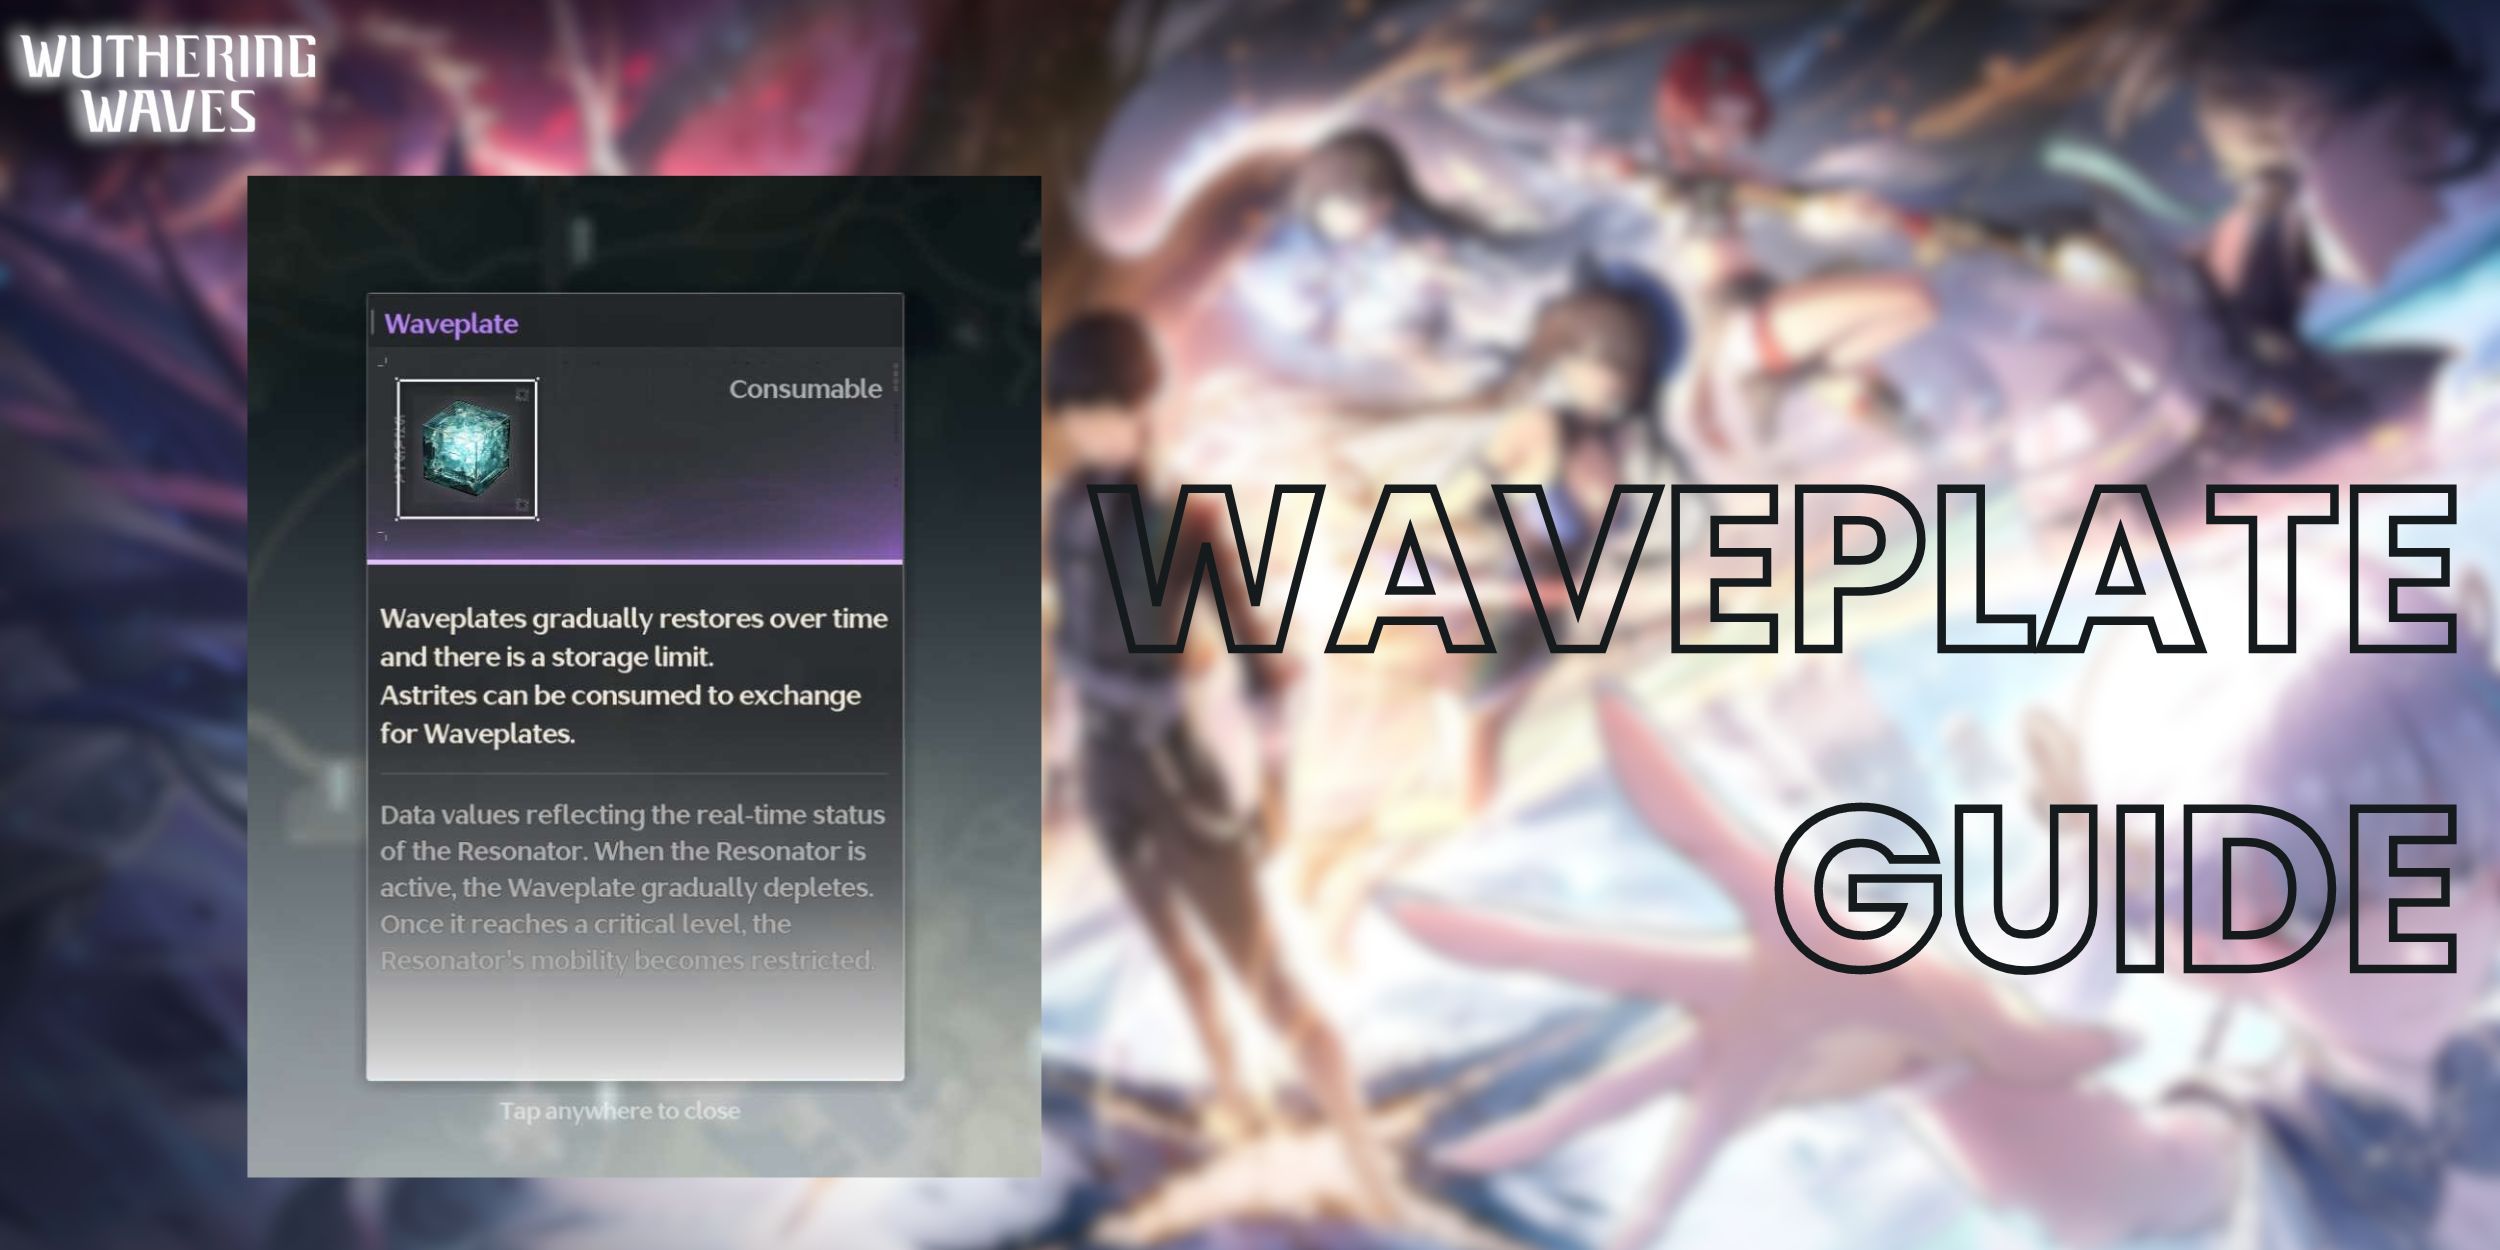 Wuthering Waves_ Waveplate Guide